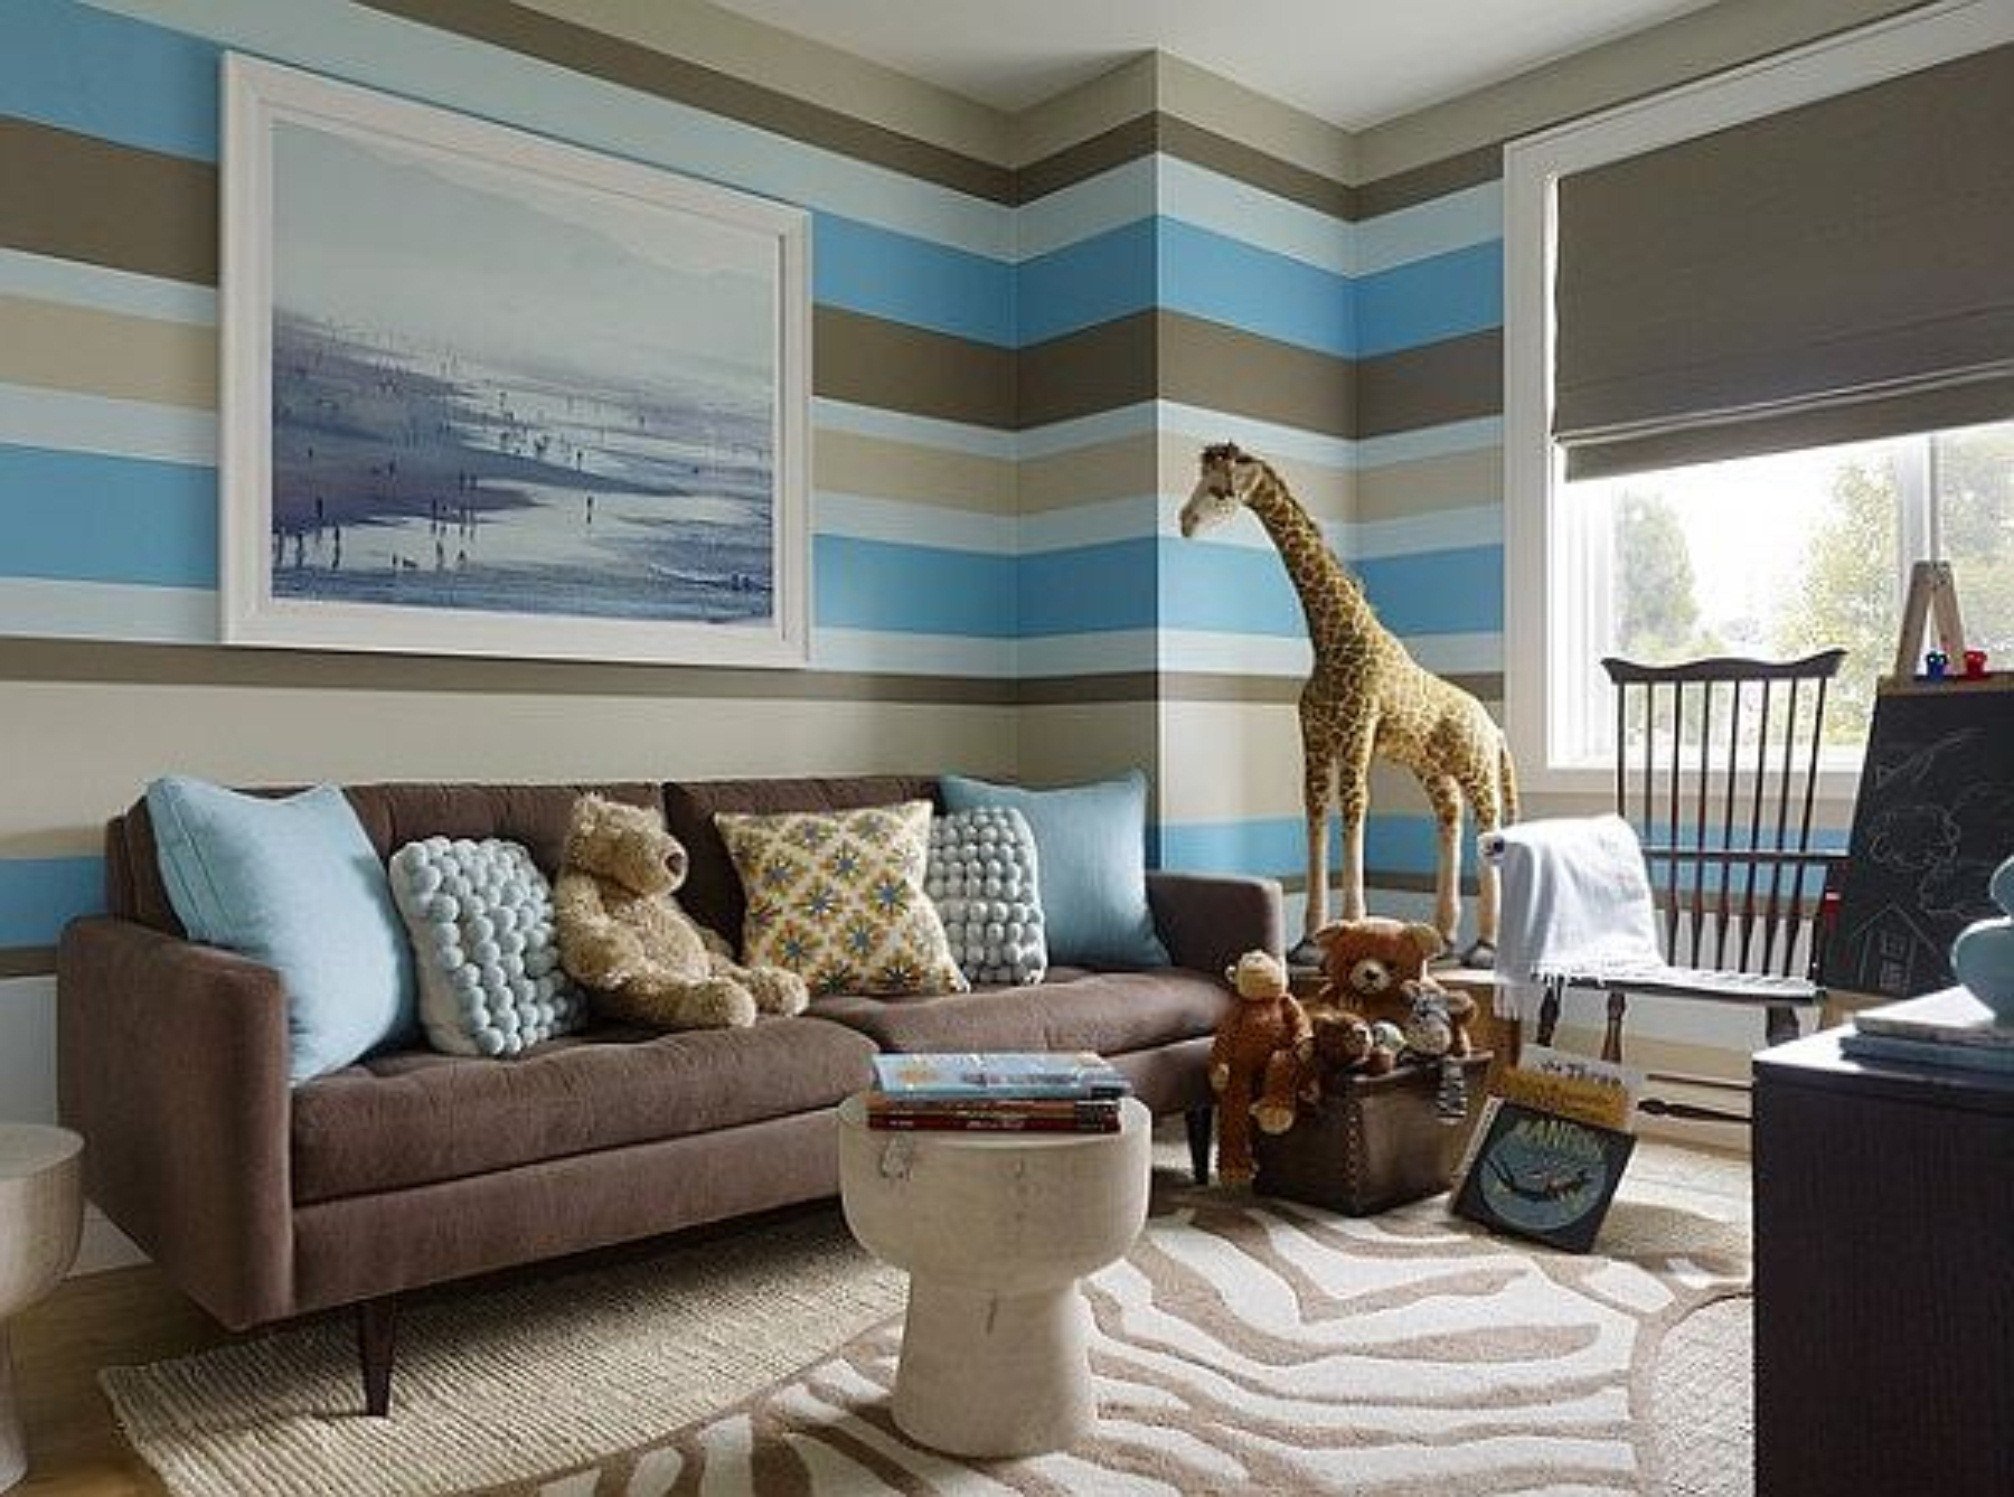 Small Living Room Paint Ideas Paint Ideas for Living Room with Narrow Space theydesign